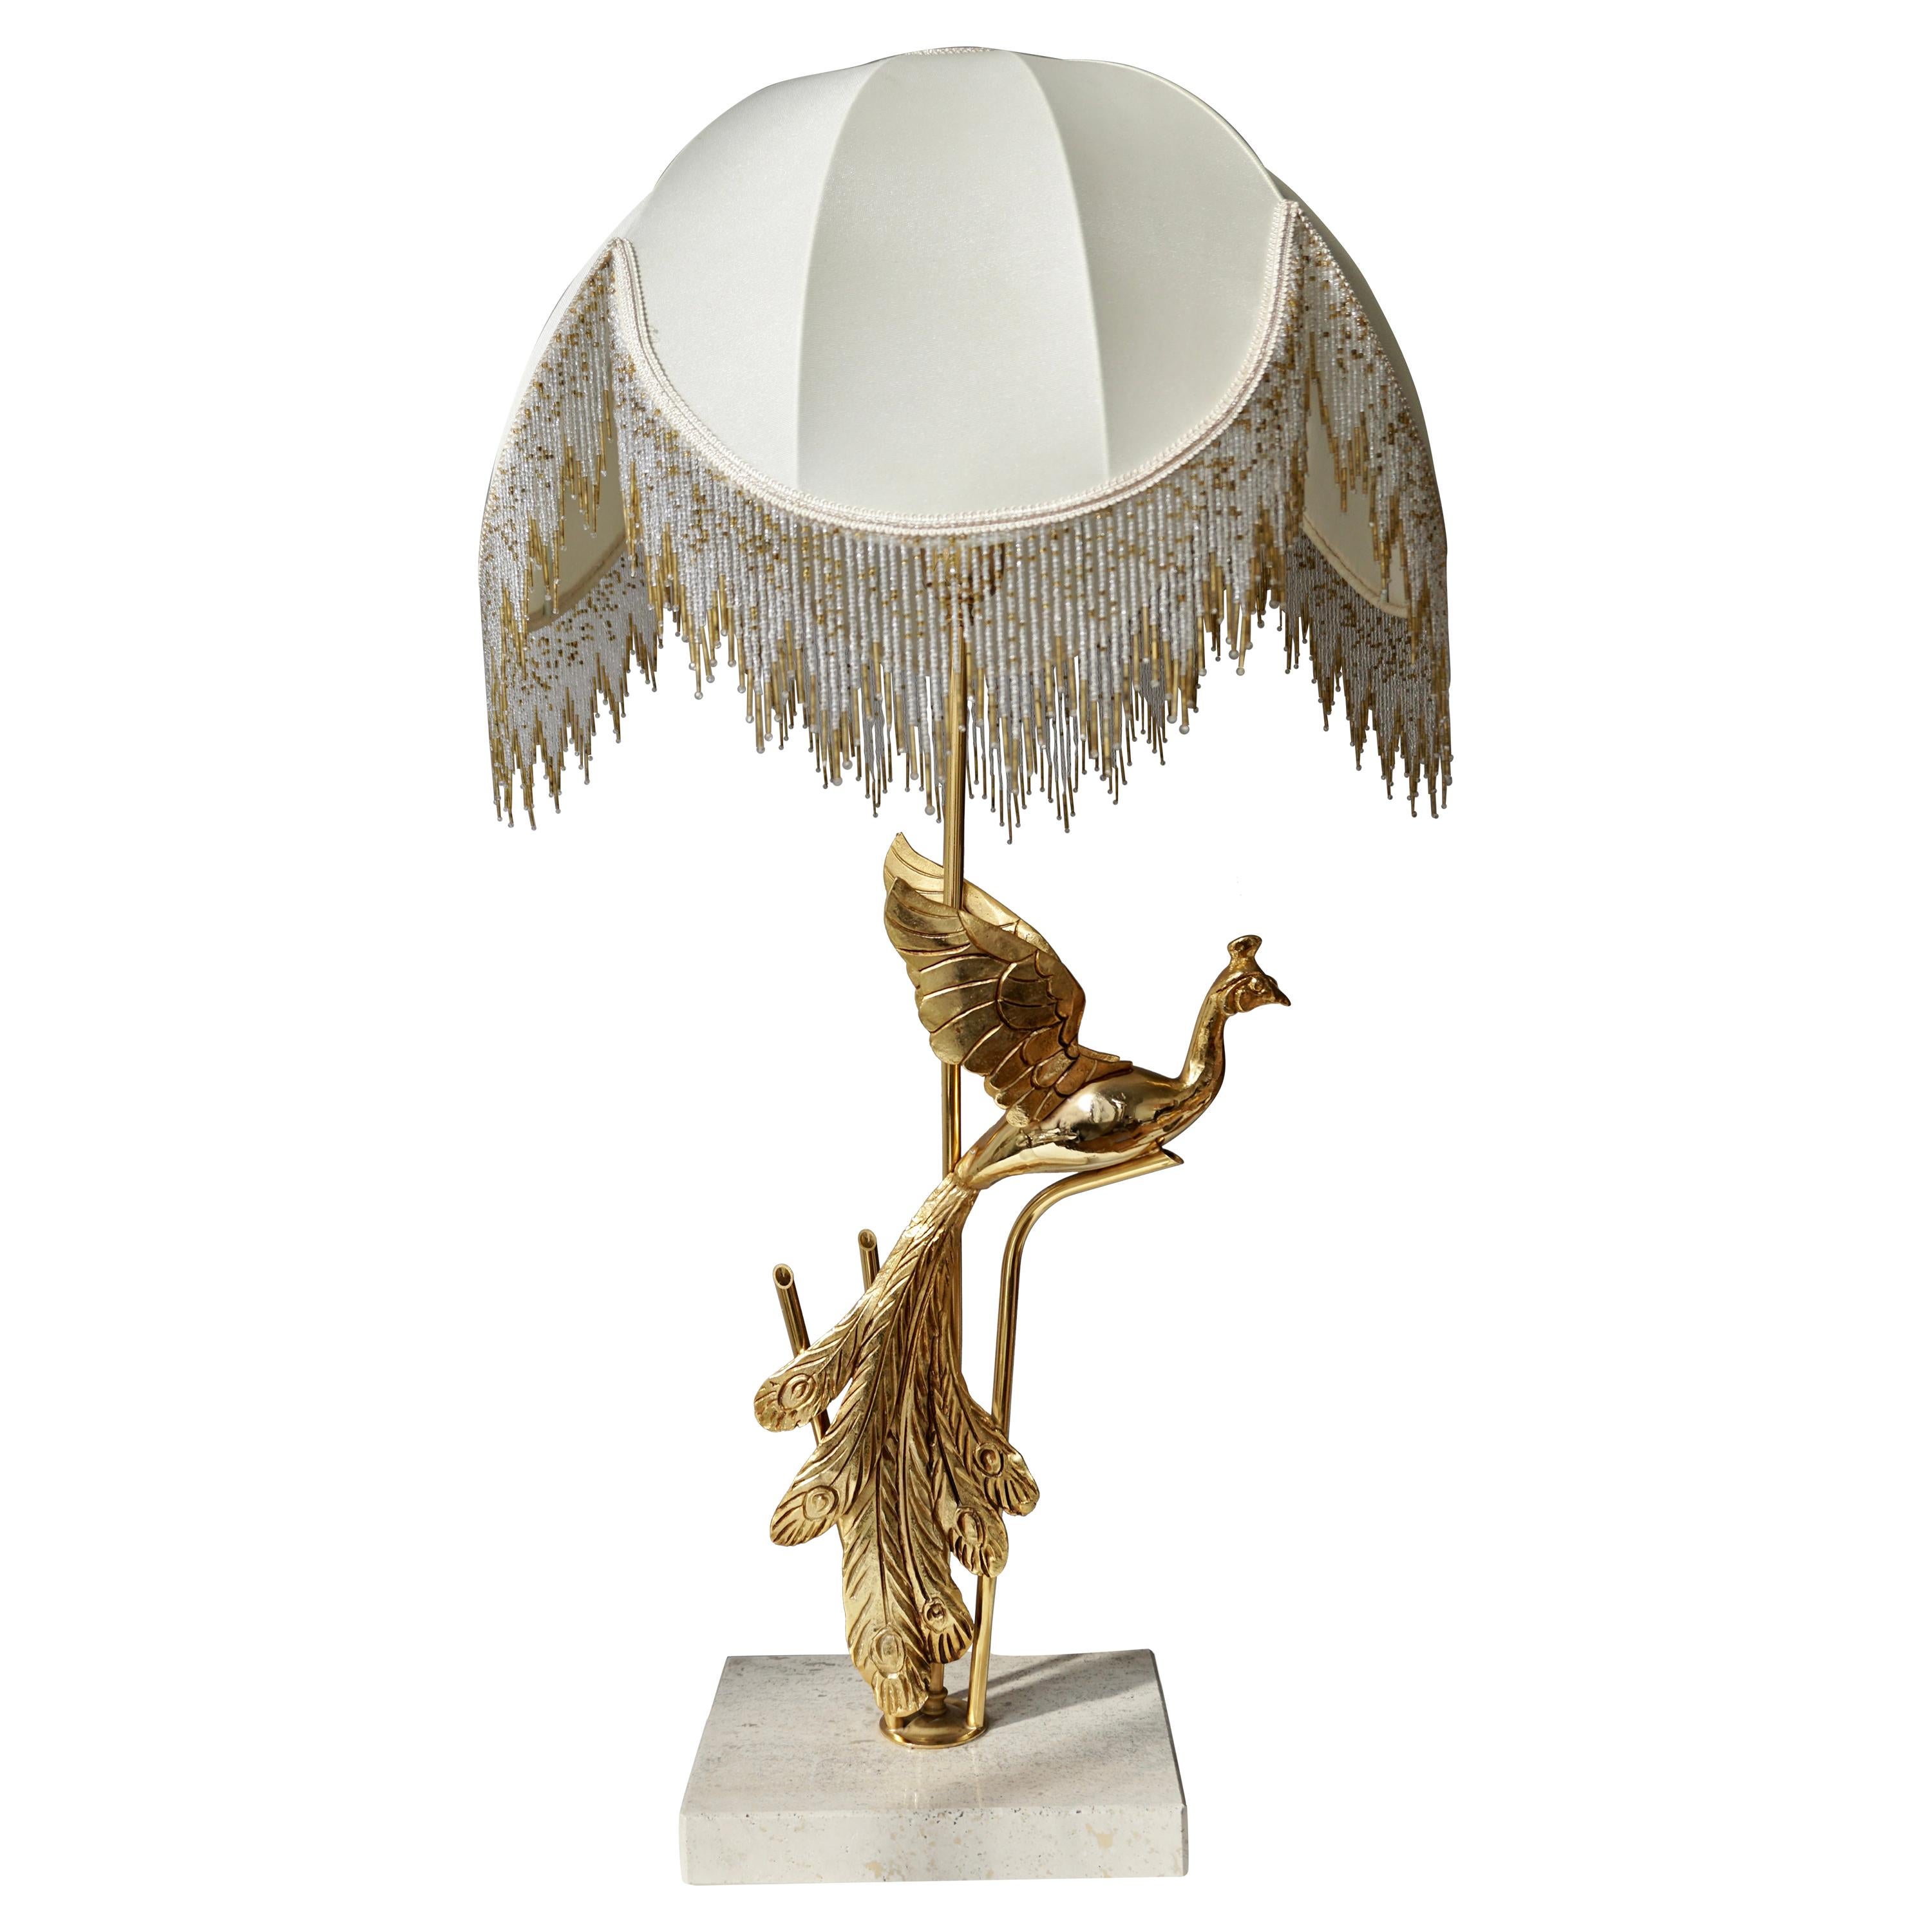 Sculptural Gilt Metal on Travertine Peacock Table Lamp or Floor Lamp, 1970s For Sale